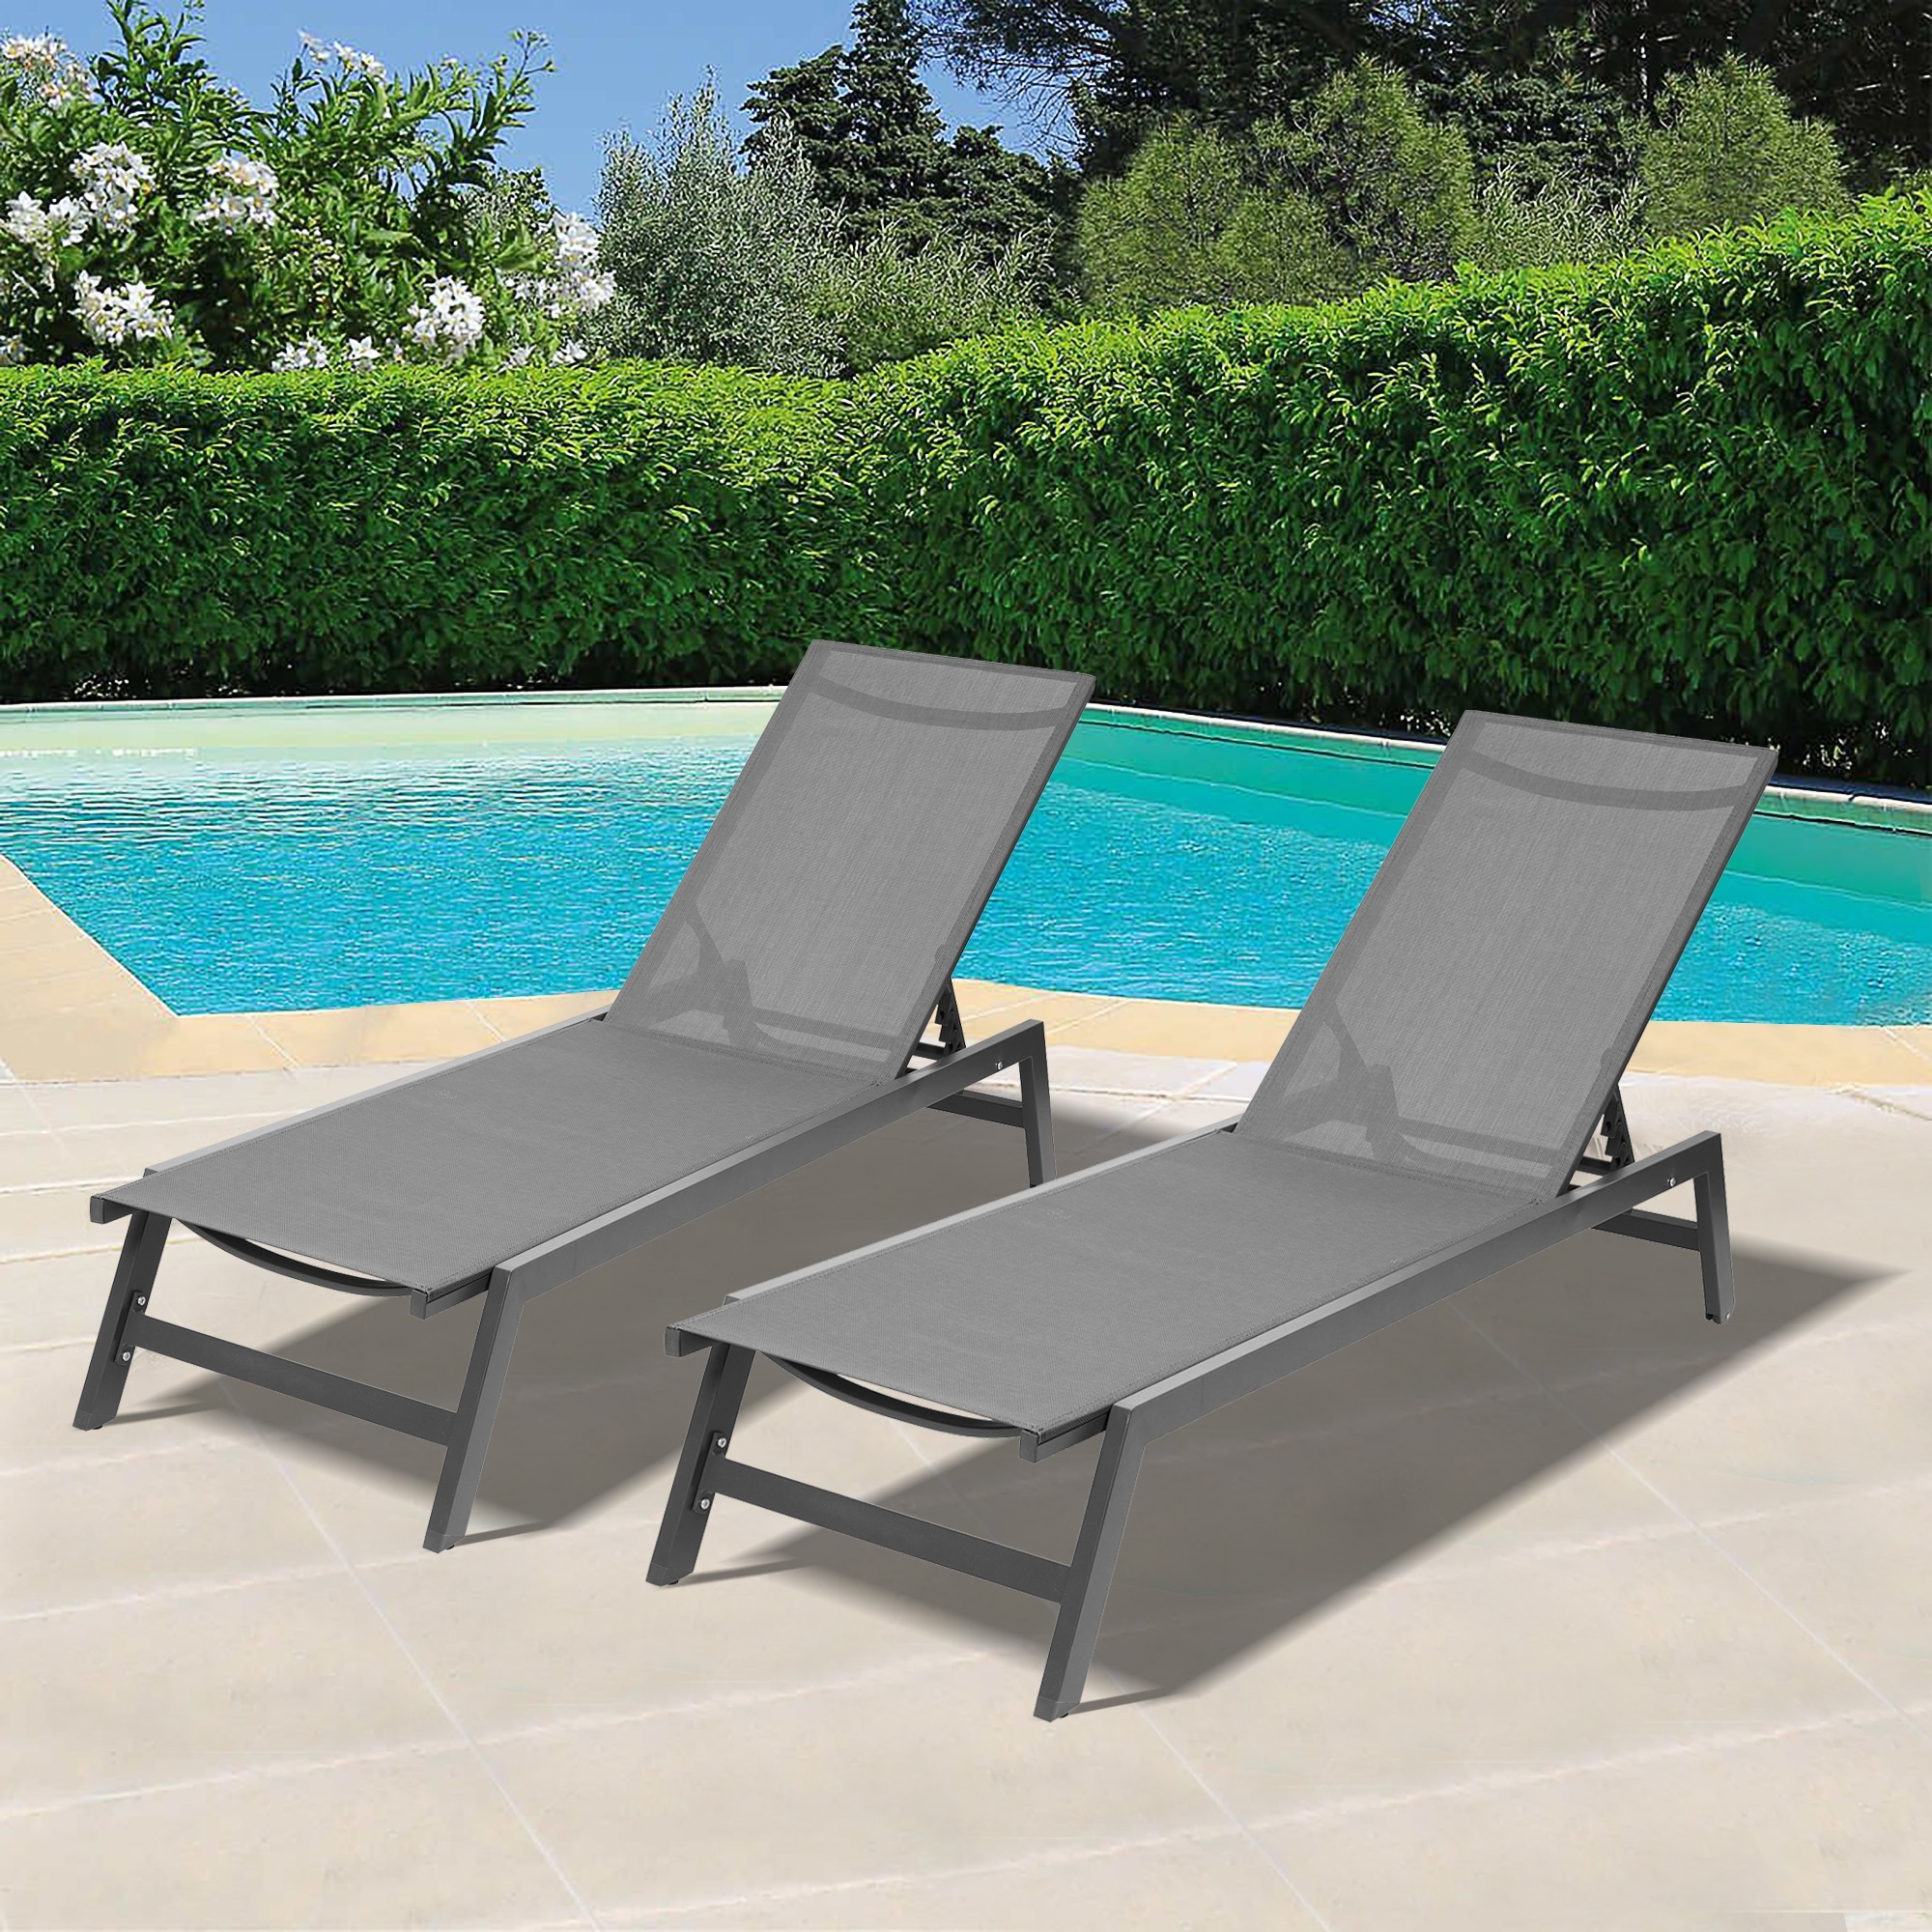 Outdoor Chaise Lounge Chair Set With Cushions Five-position Adjustable Aluminum Recliner All Weather For Patio Beach Yard Pool